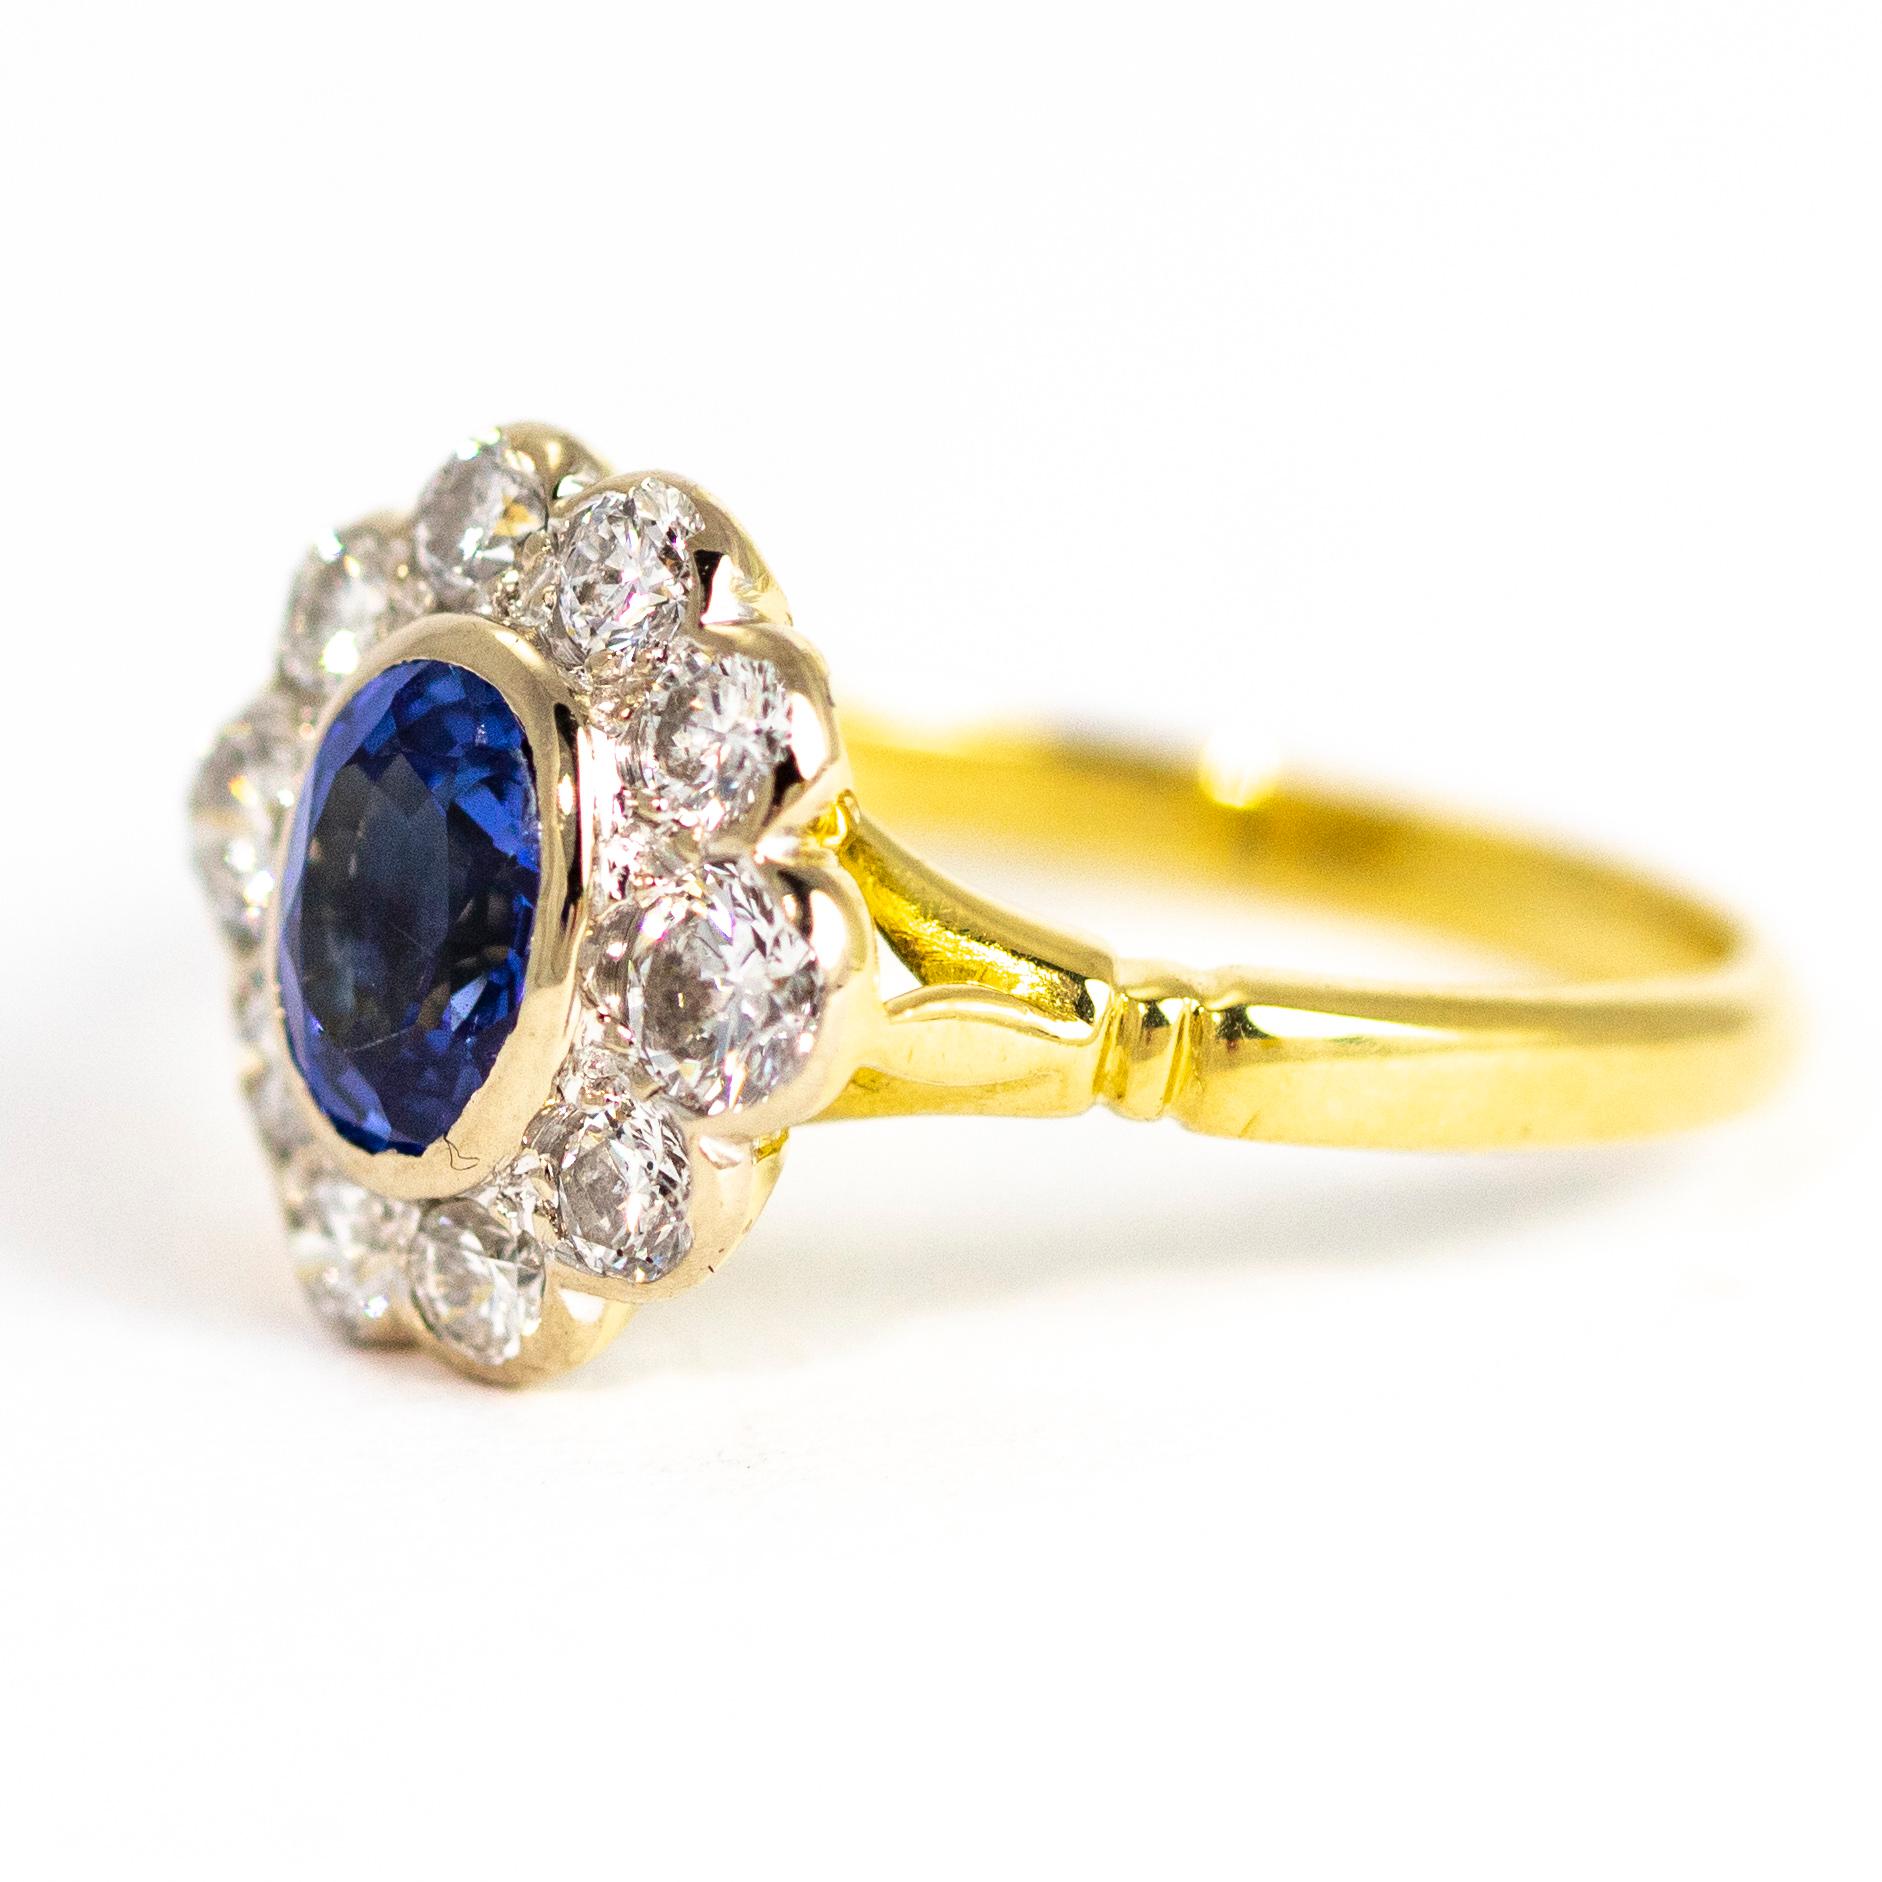 A large oval medium hue blue sapphire sits at the centre of a hoop of bright, clean old European cut diamonds which measure approximately a total of 1carat. The back of the setting is modelled into a sweet flower motif and all is made of 18ct